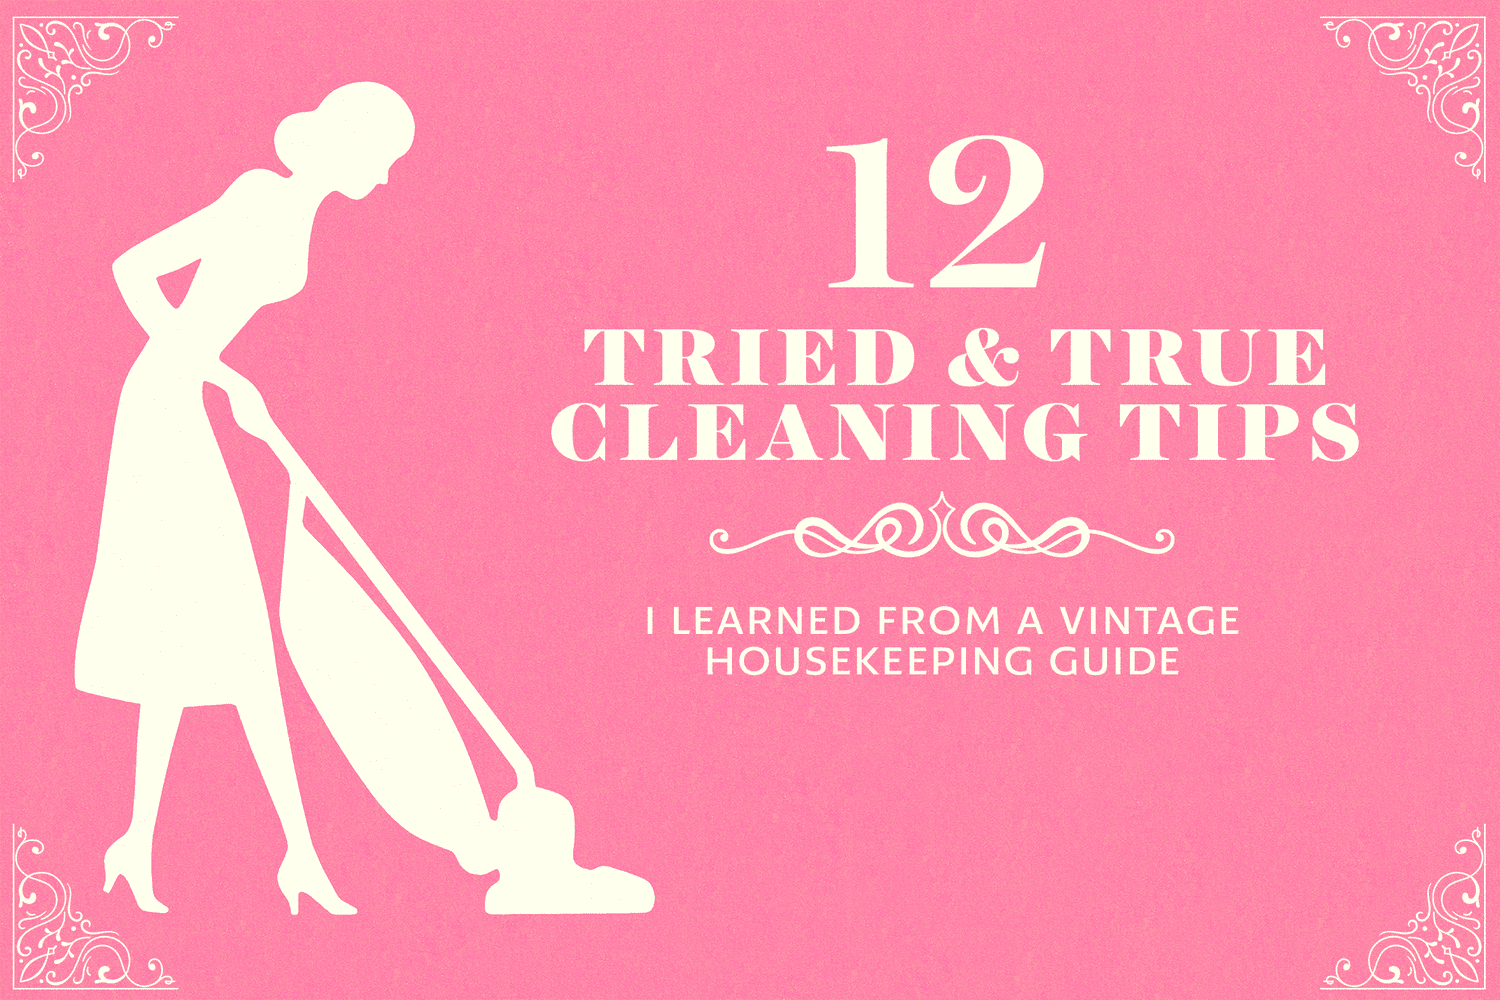 pink image with silhouette of woman vacuuming and title "12 Tried-and-True Cleaning Tips I Learned From a Vintage Housekeeping Guide"